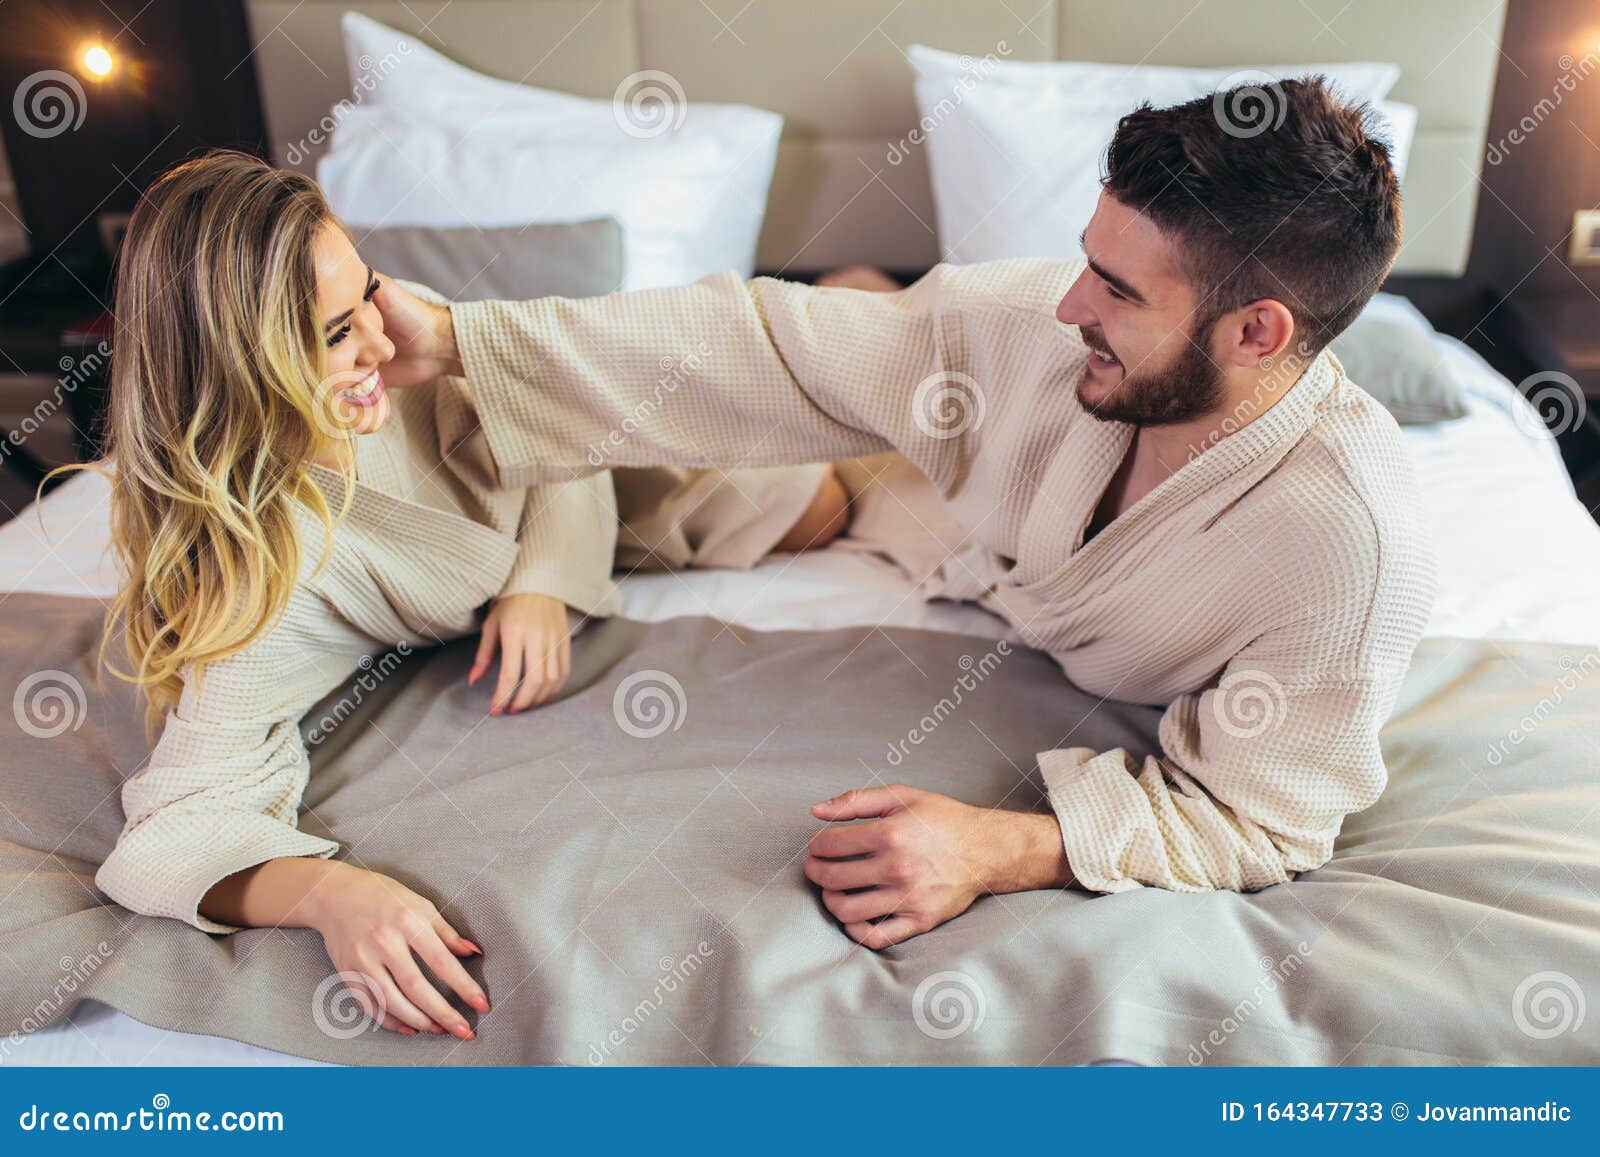 Couple In Bathrobes Lying On Bed In Hotel Room Stock Image Image Of